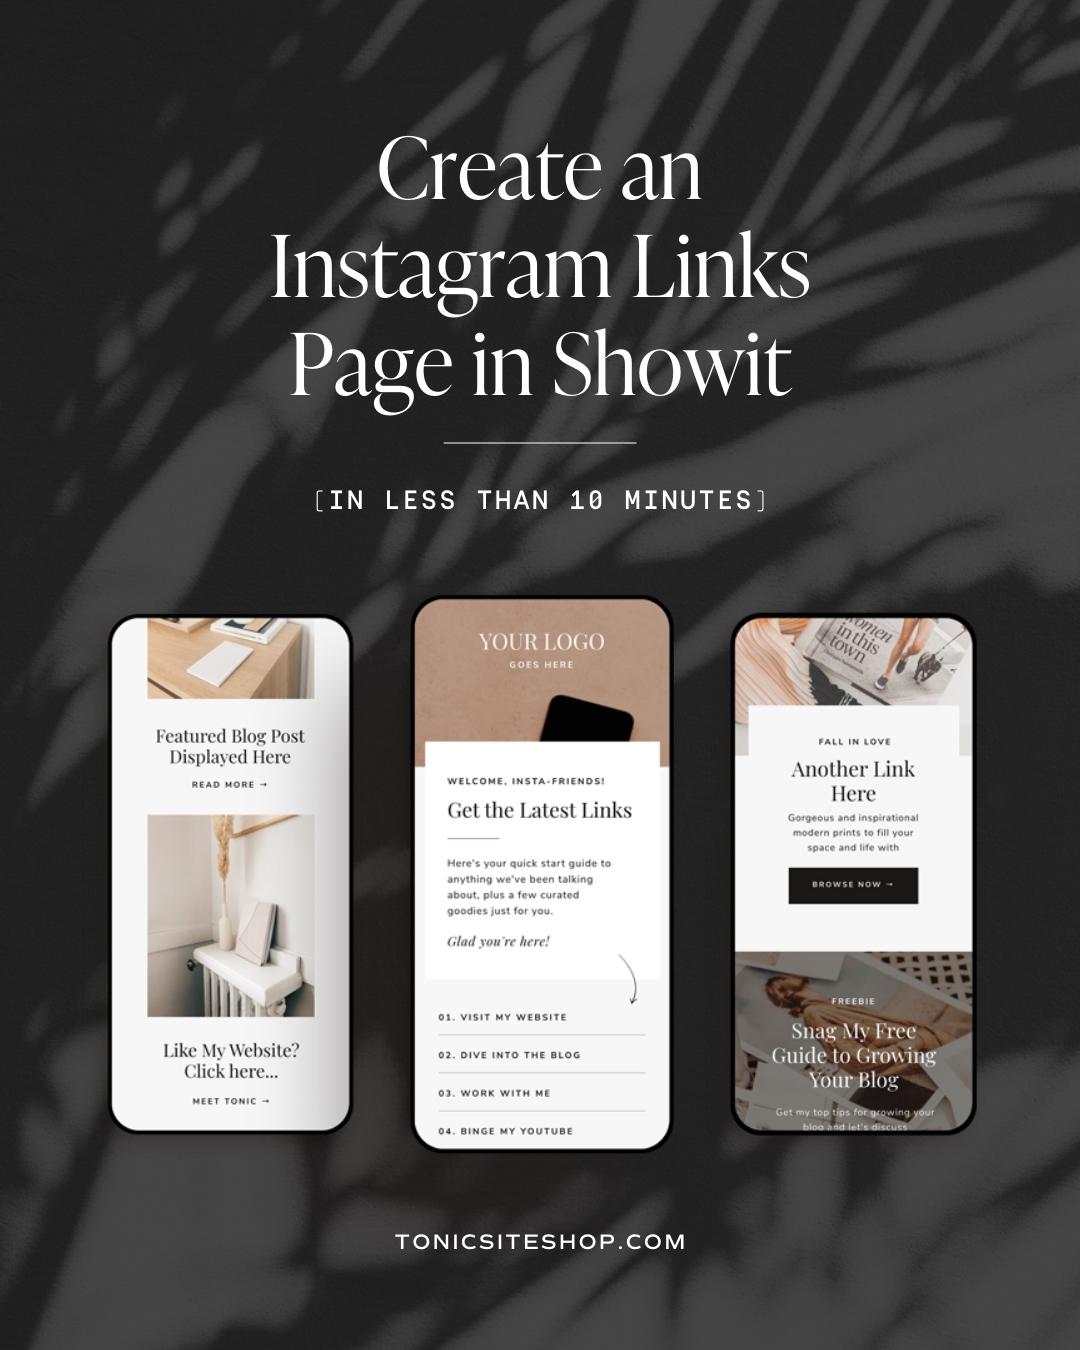 Create an Instagram Links page in Showit - Tonic Site Shop